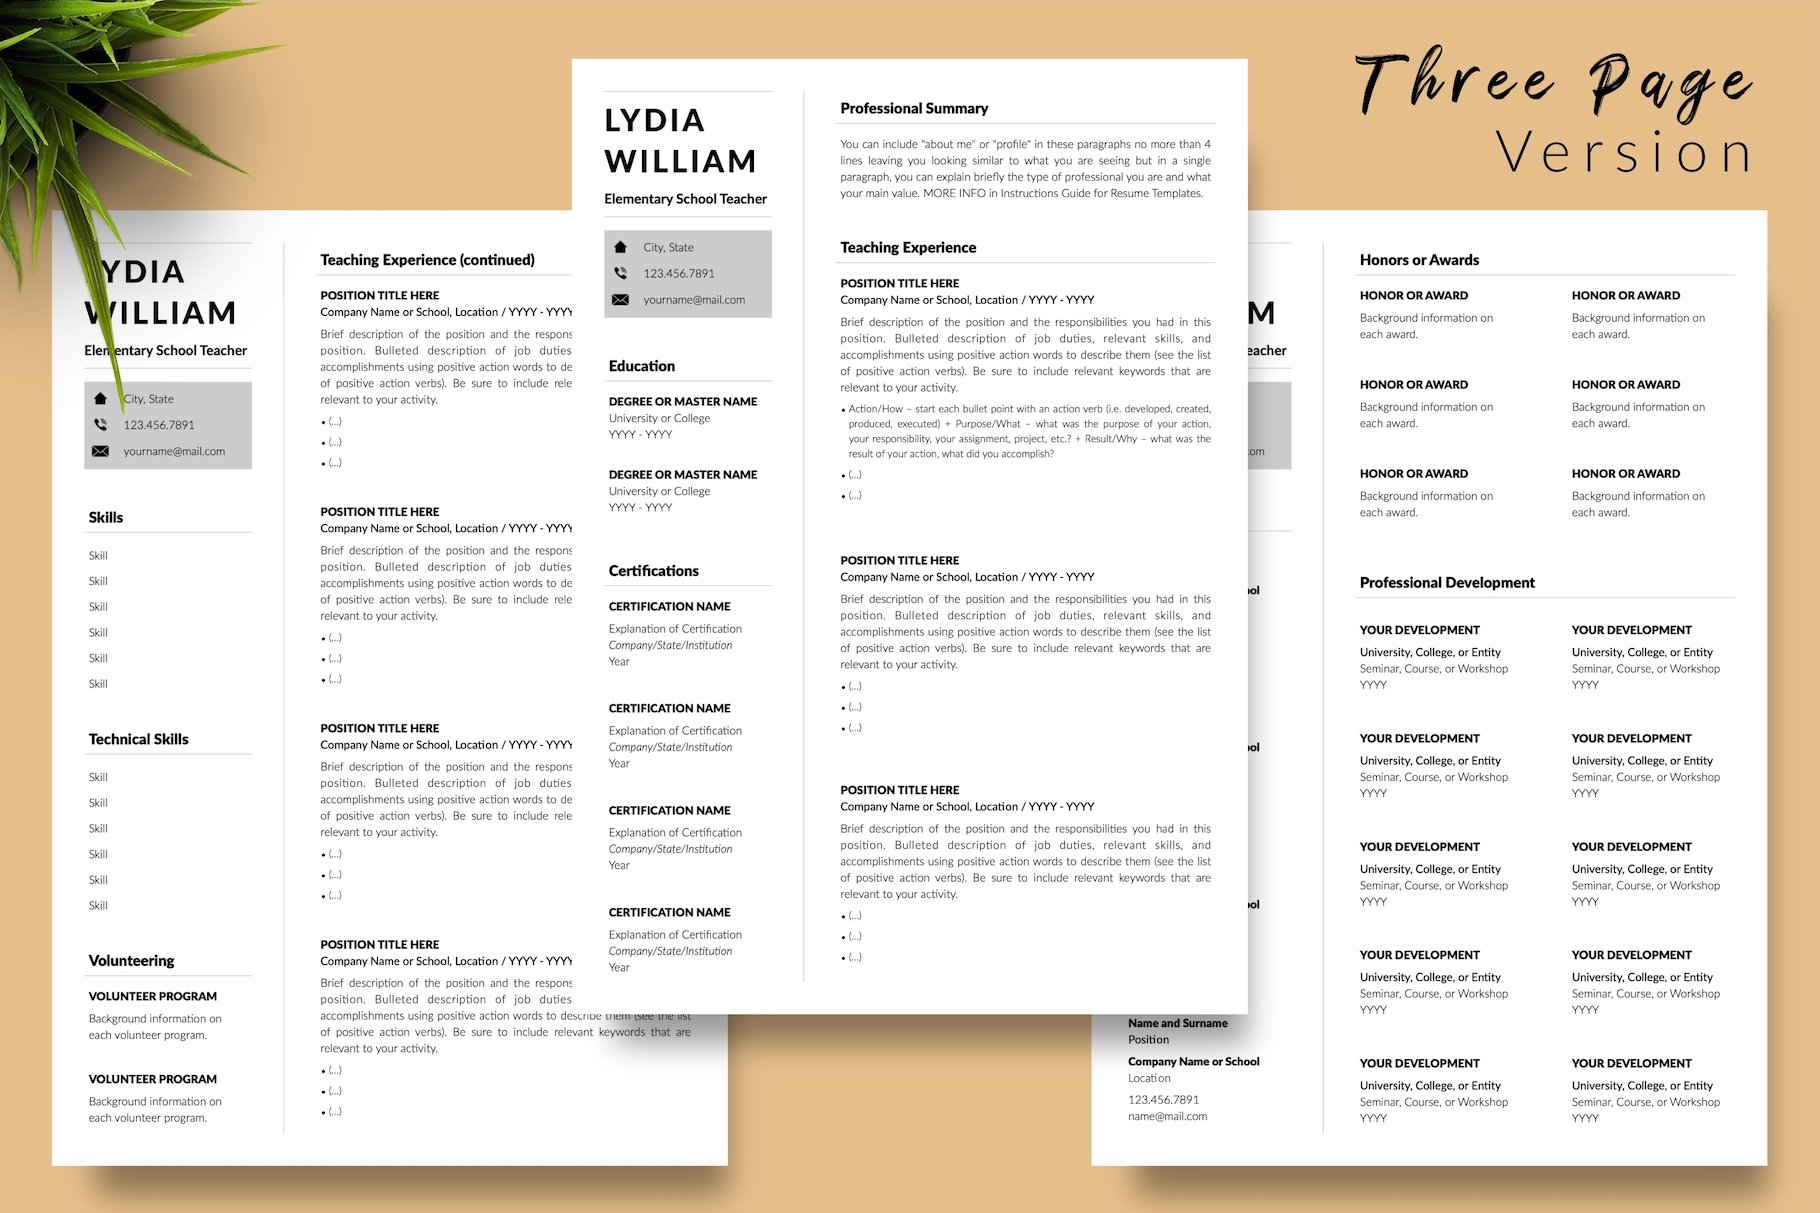 resume cv template lydia william for creative market 04 three page version 528